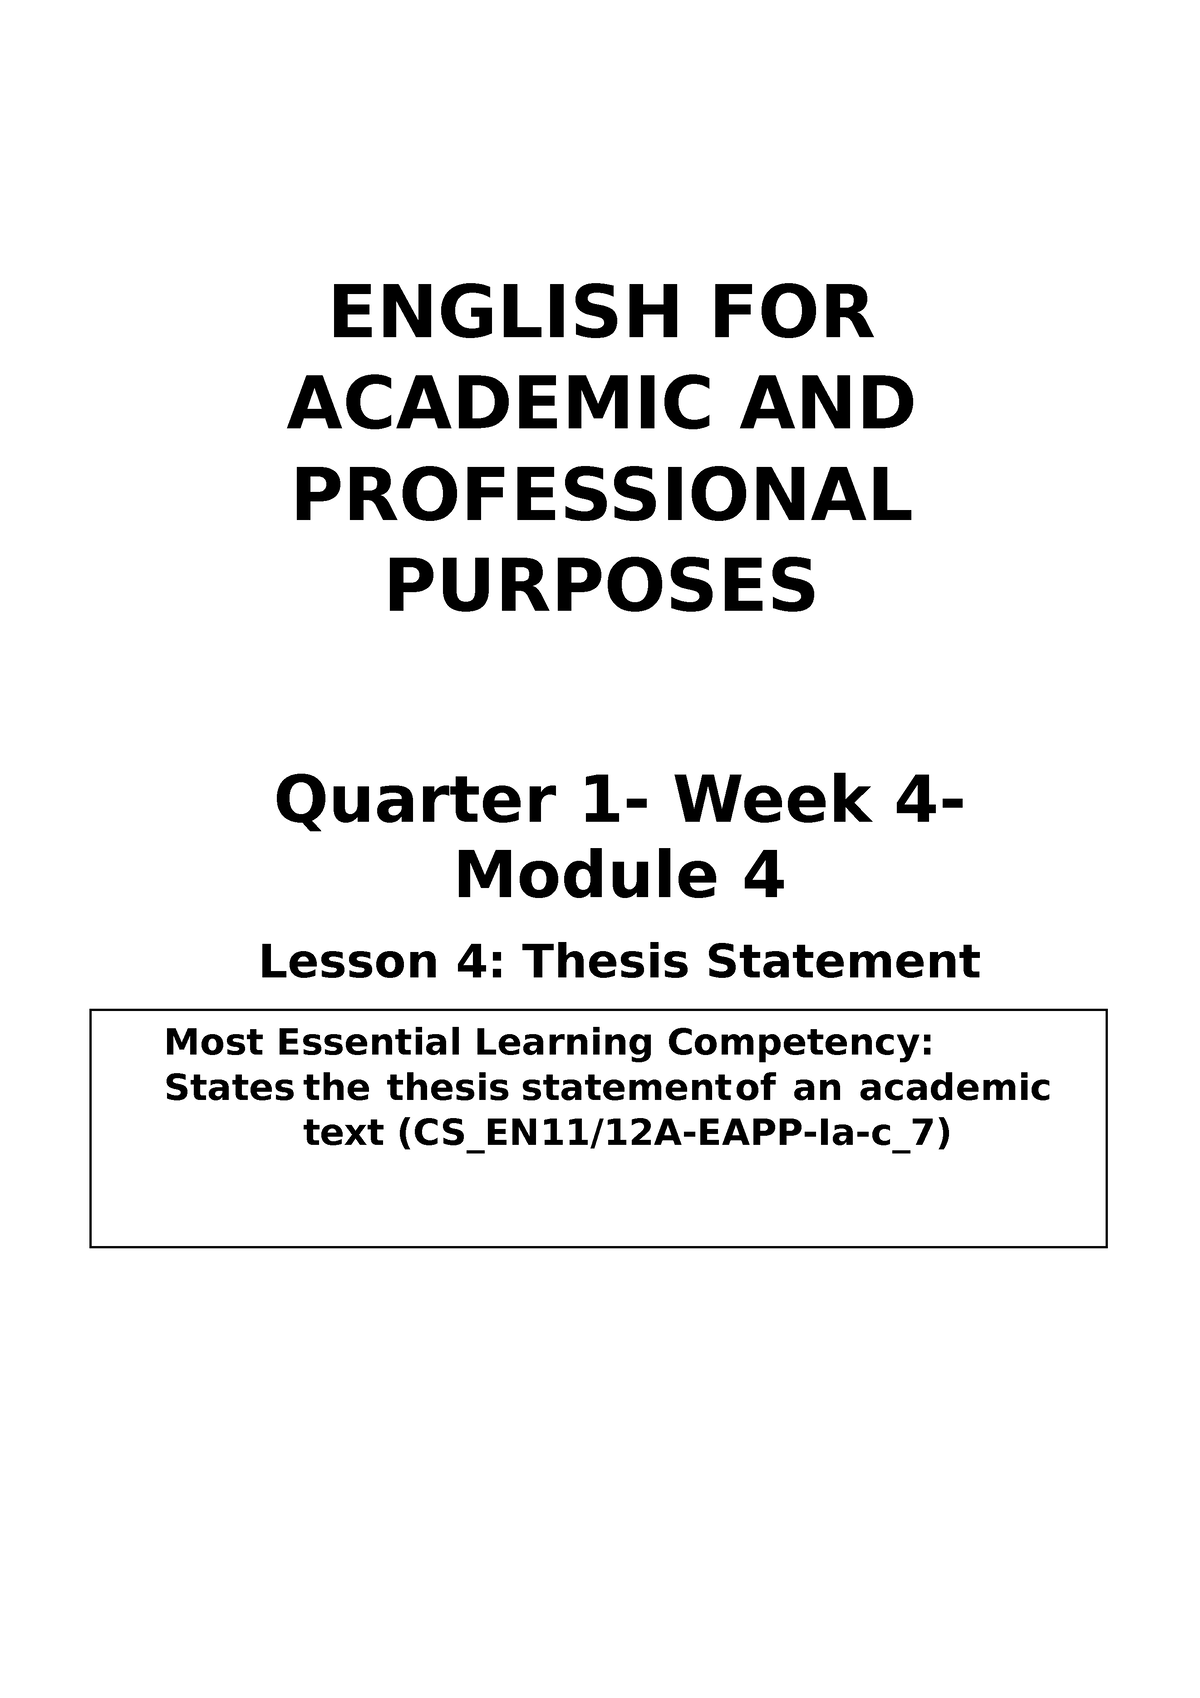 Eapp Q1 W4 This Is A Practice Material English For Academic And Professional Purposes 0863